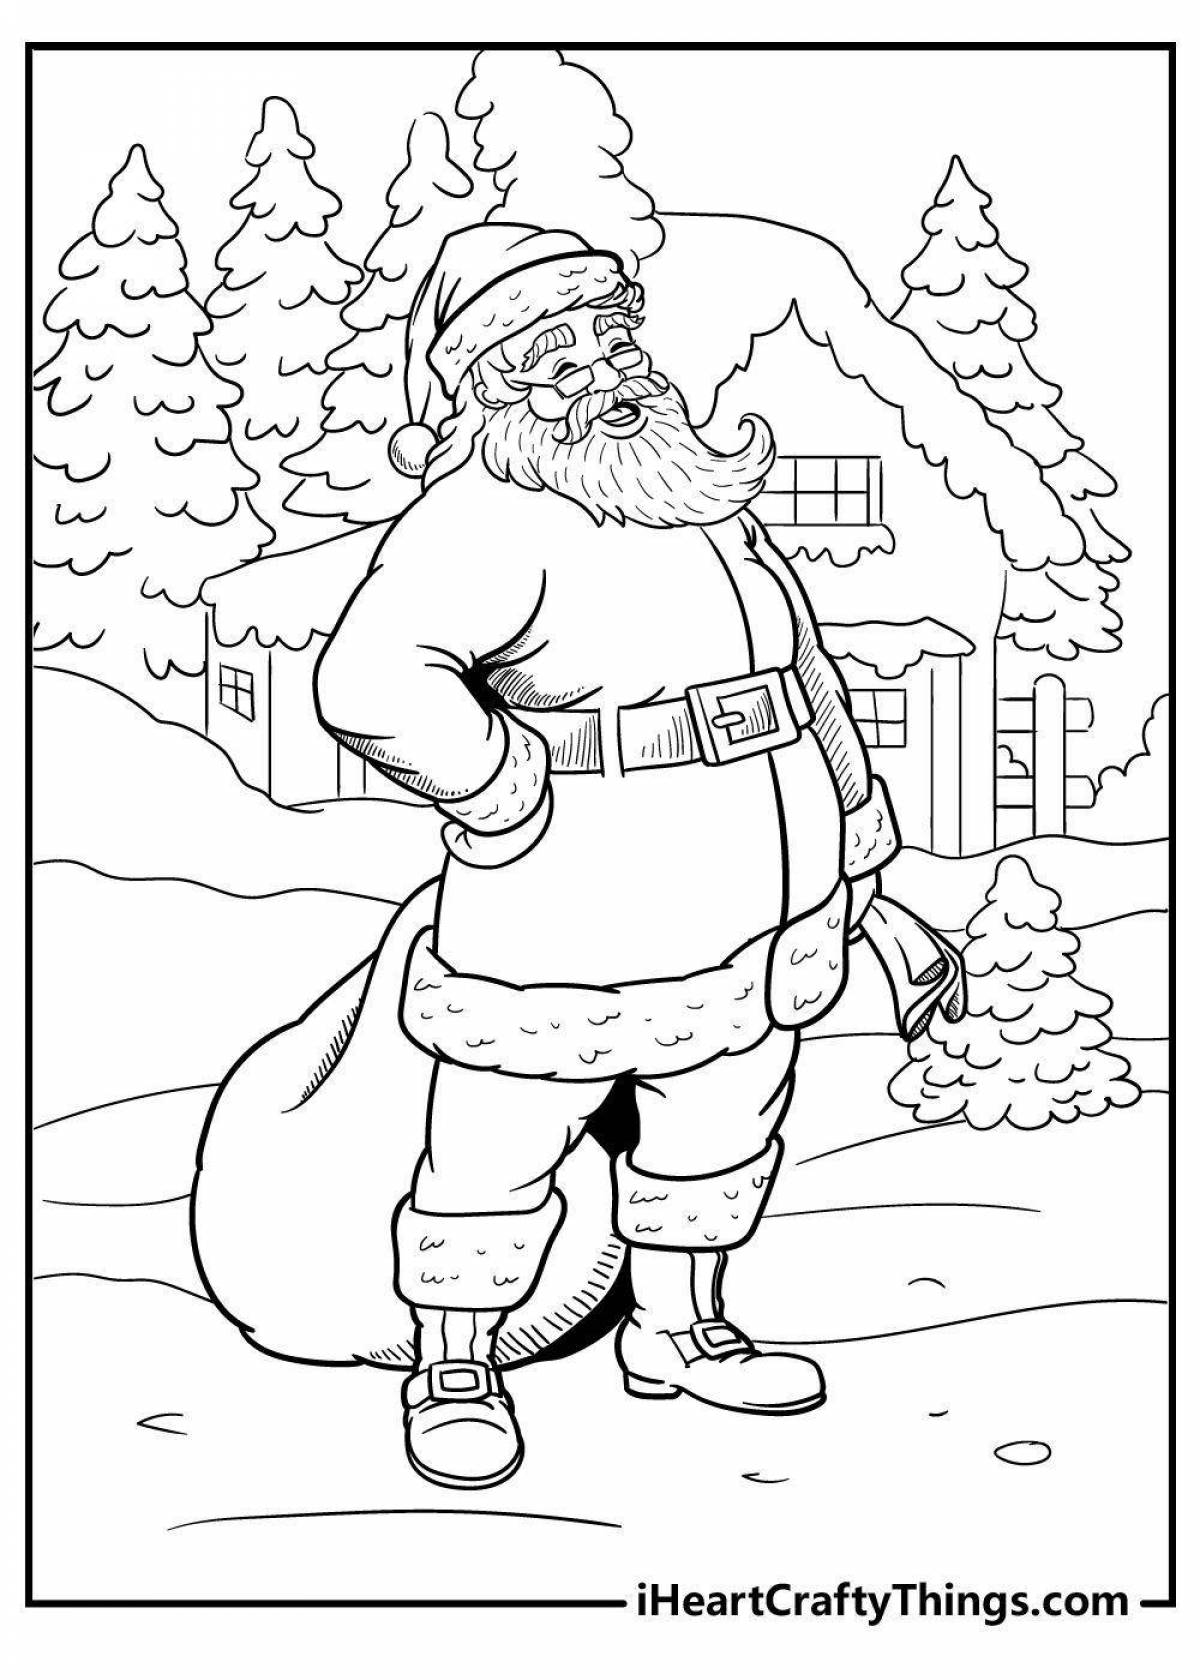 Glowing santa claus and gray wolf coloring page